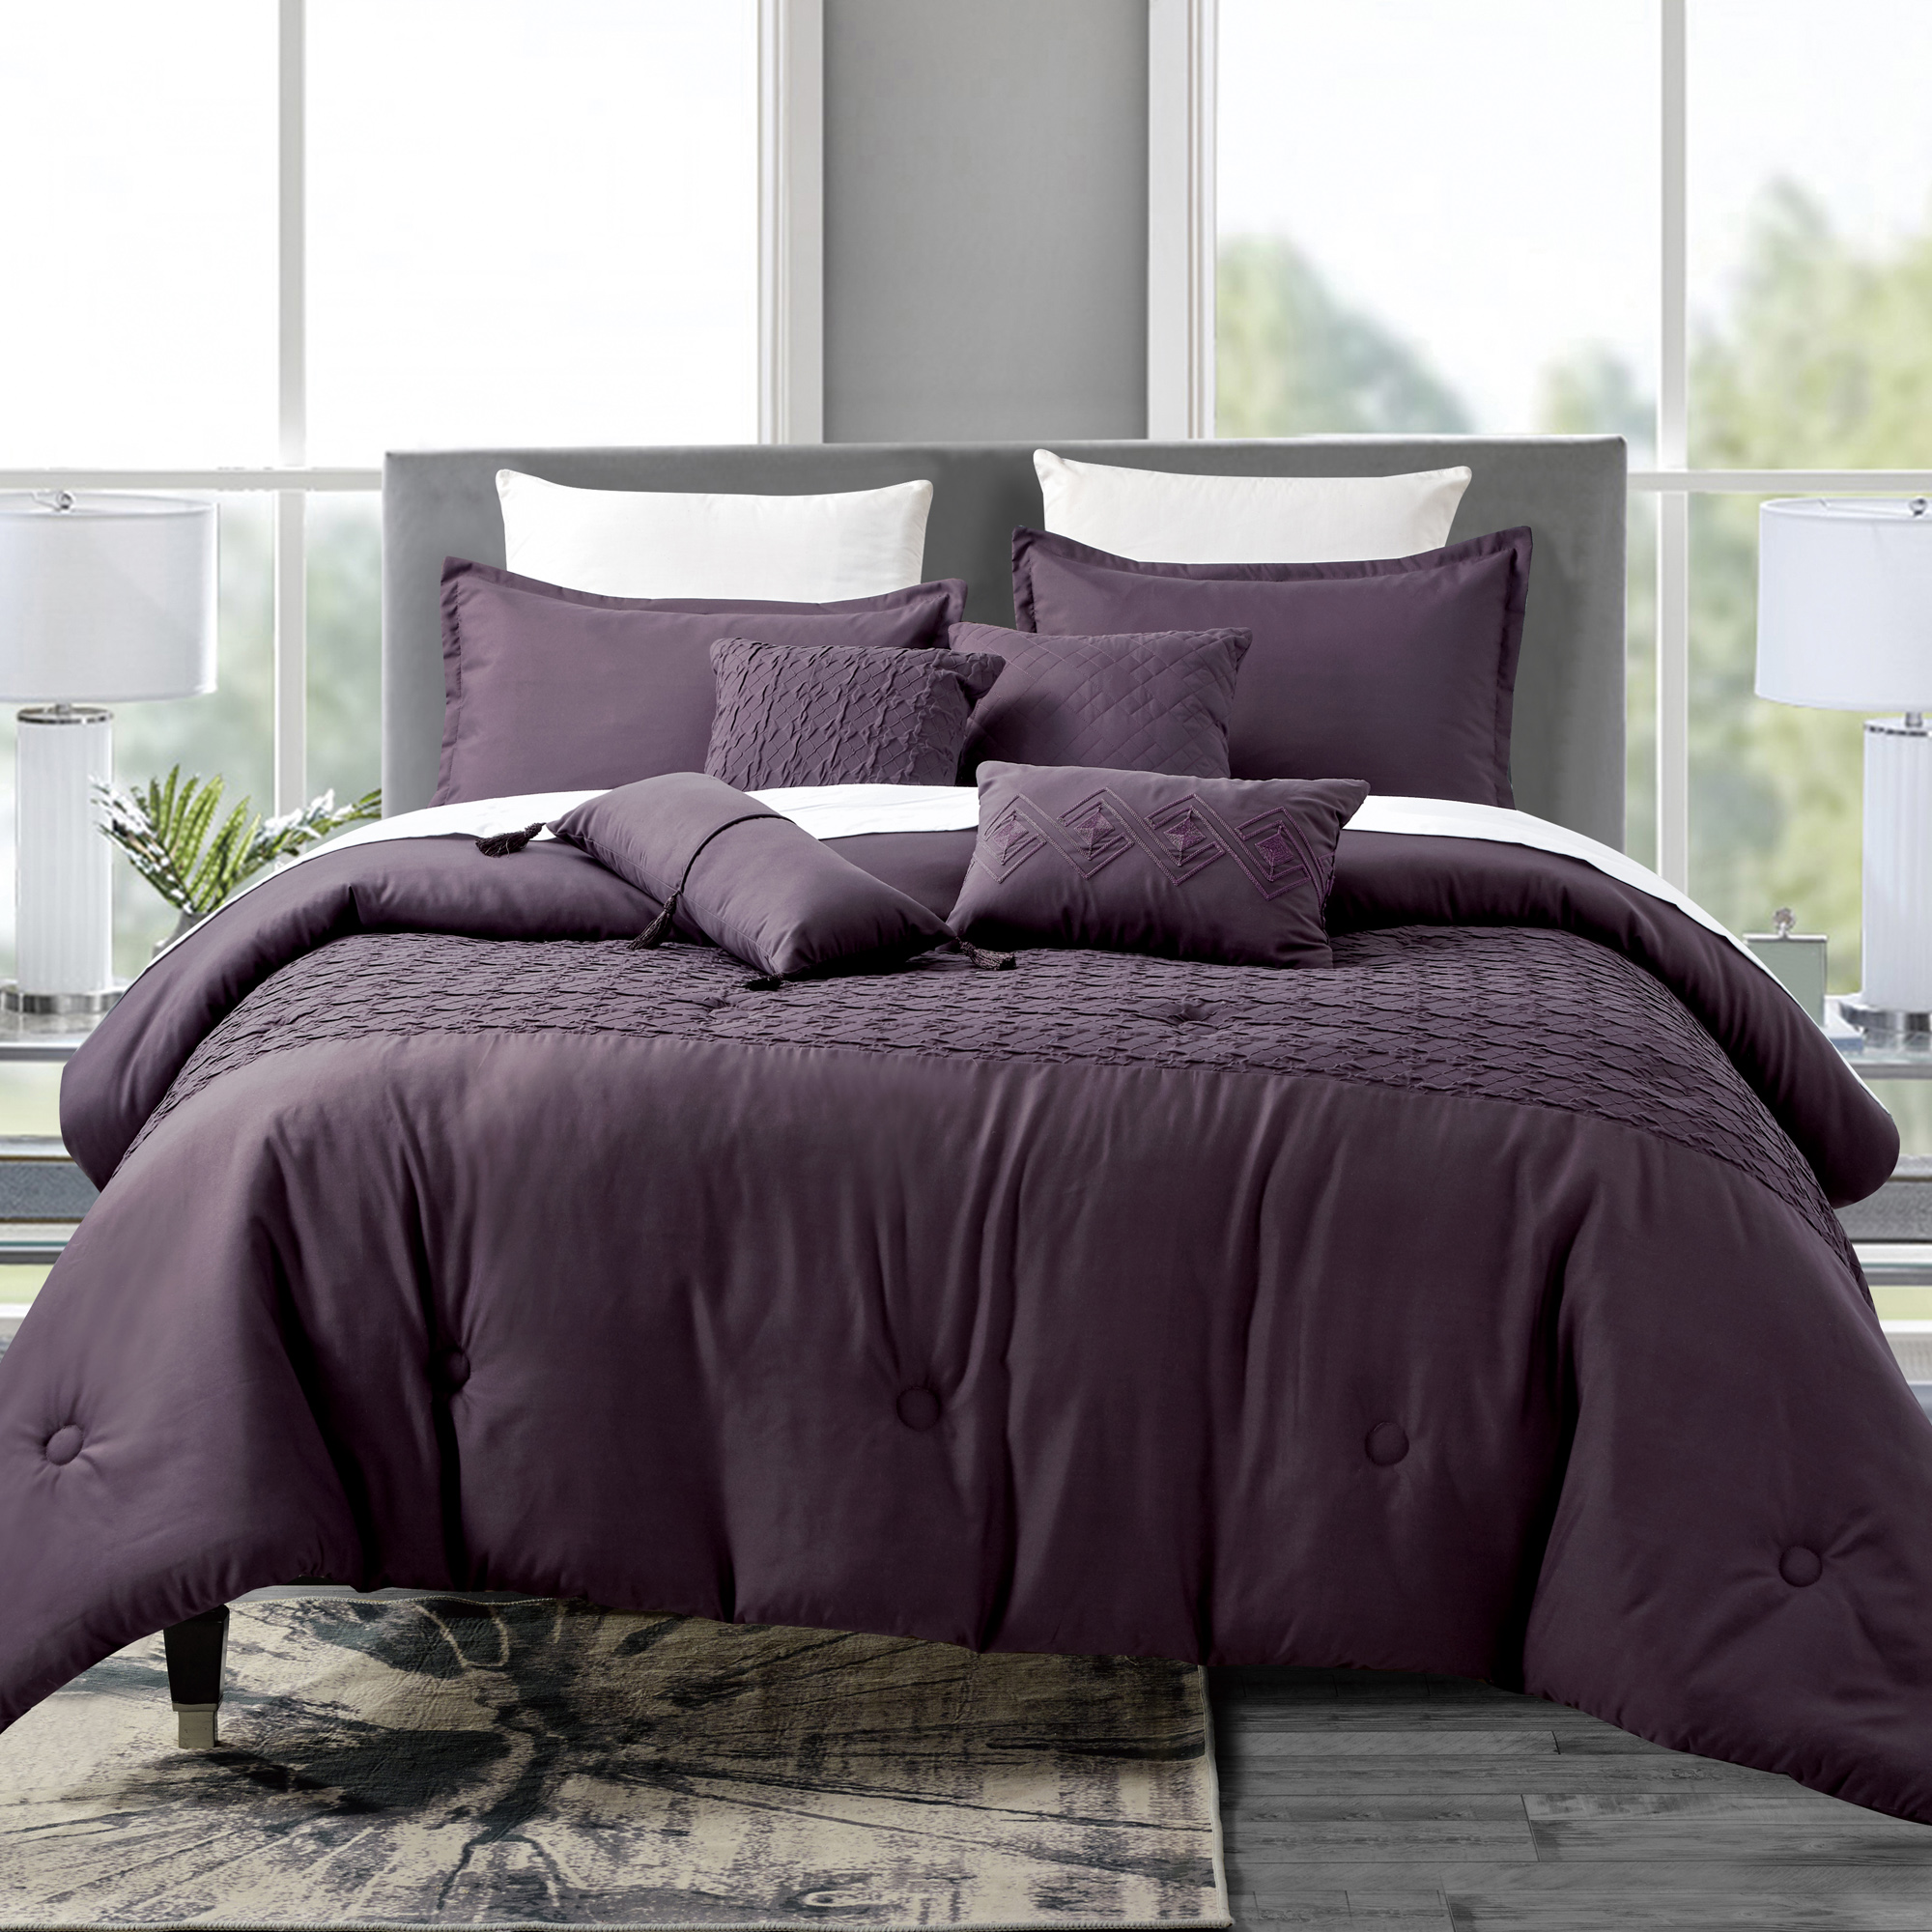 Bedding Comforter Set Luxury Bed, Bed In A Bag Purple King